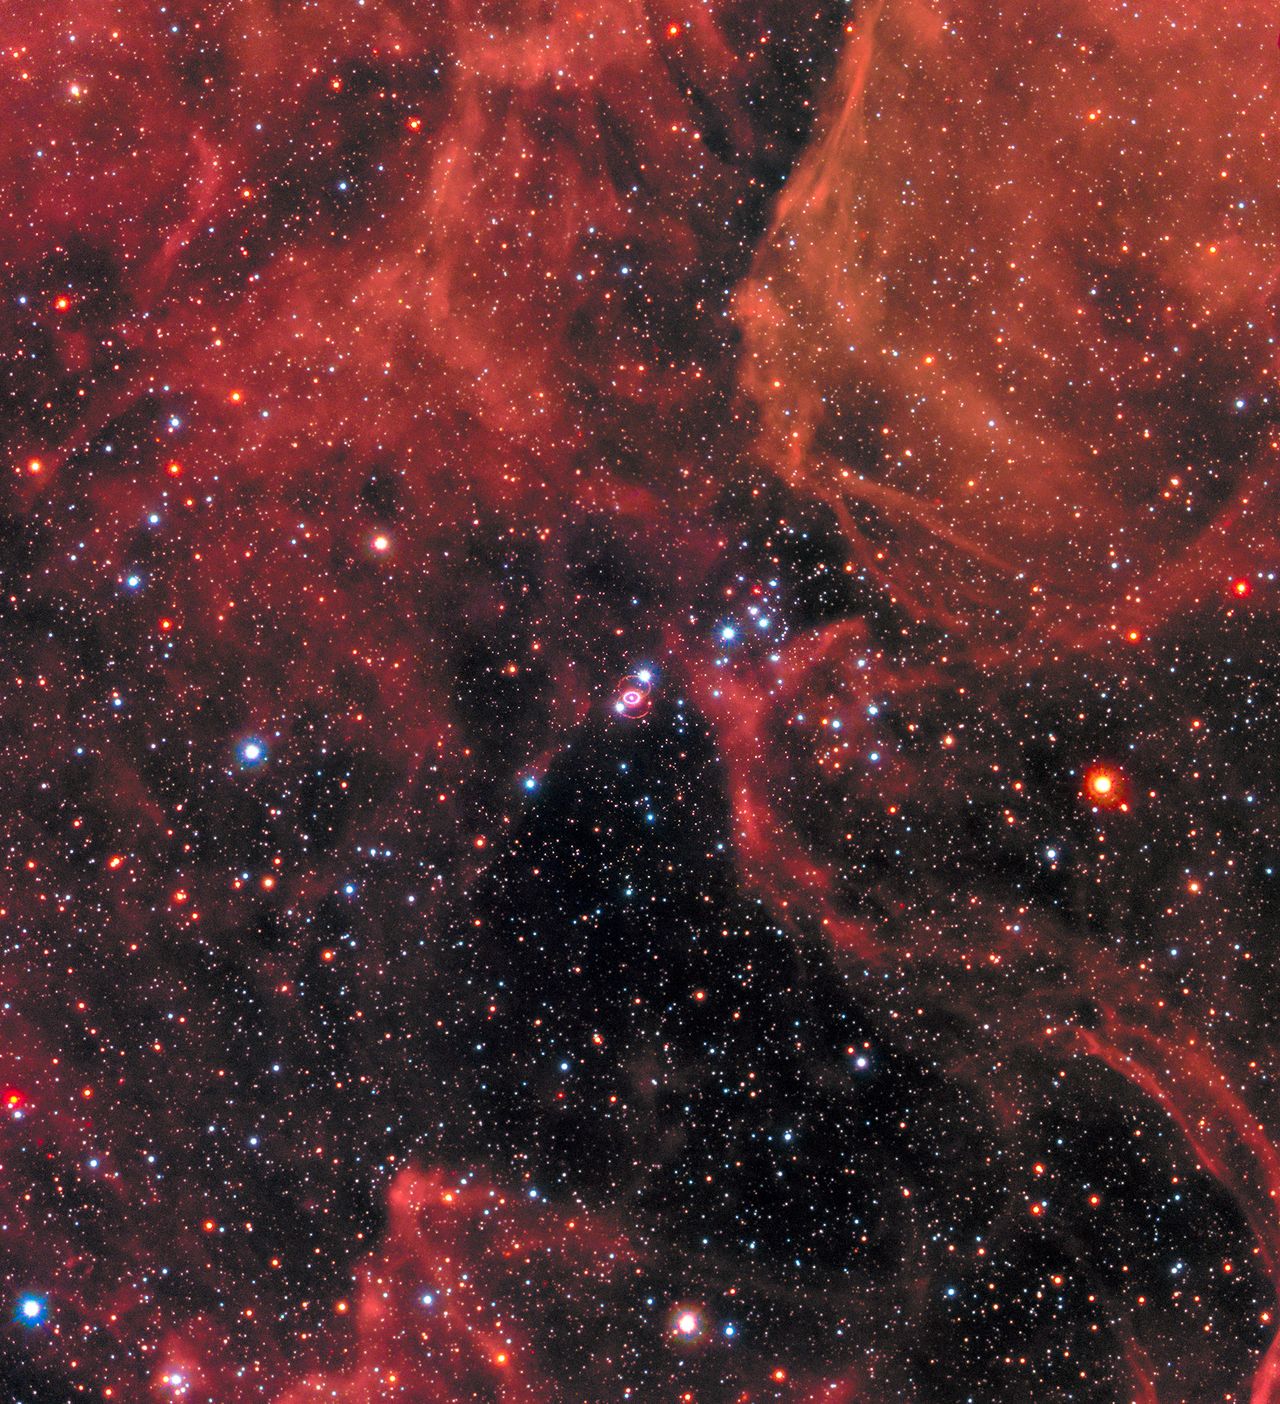 SN 1987A can be seen at the centre of this image, resembling a white eye with a bright white pupil. The image can be viewed in full here.